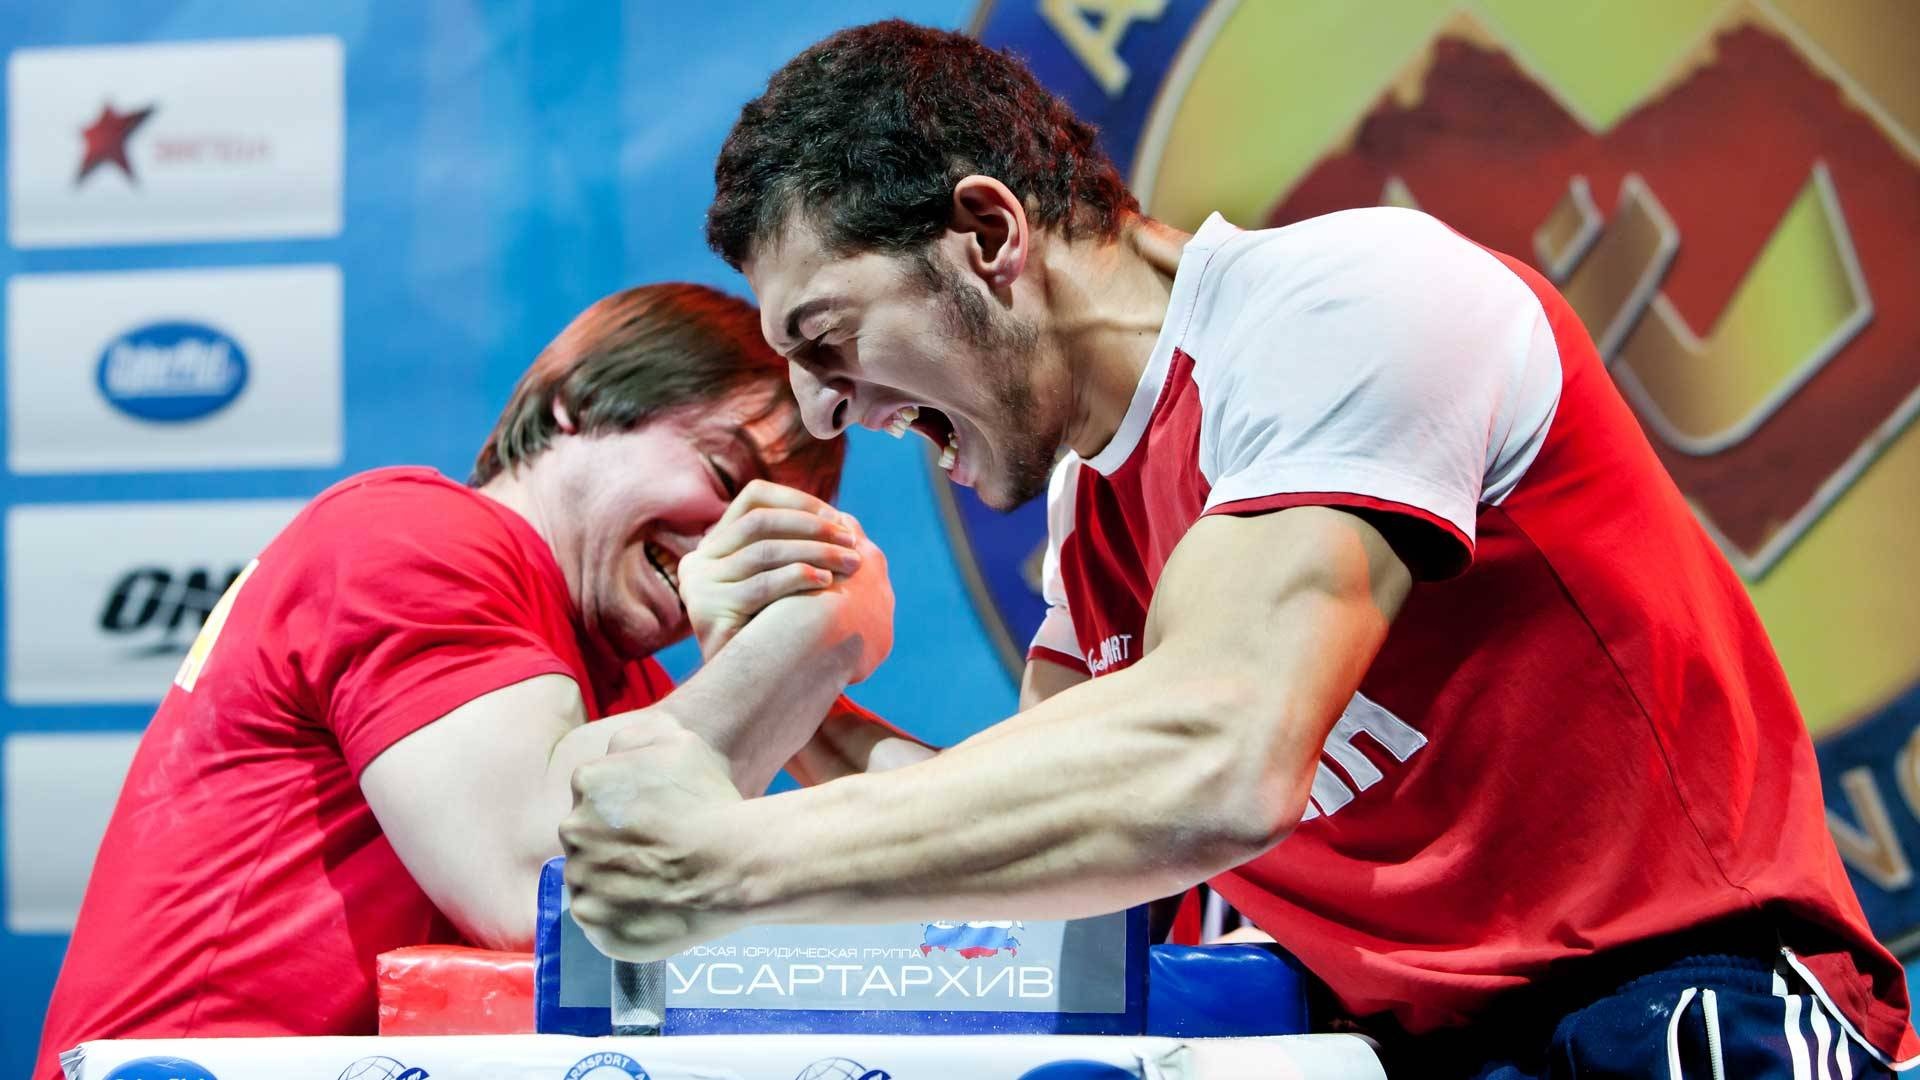 Arm Wrestling: Athens World Company Sports Games 2021, Right-hand Wrestling, Man's Competition, Competitive Match. 1920x1080 Full HD Wallpaper.